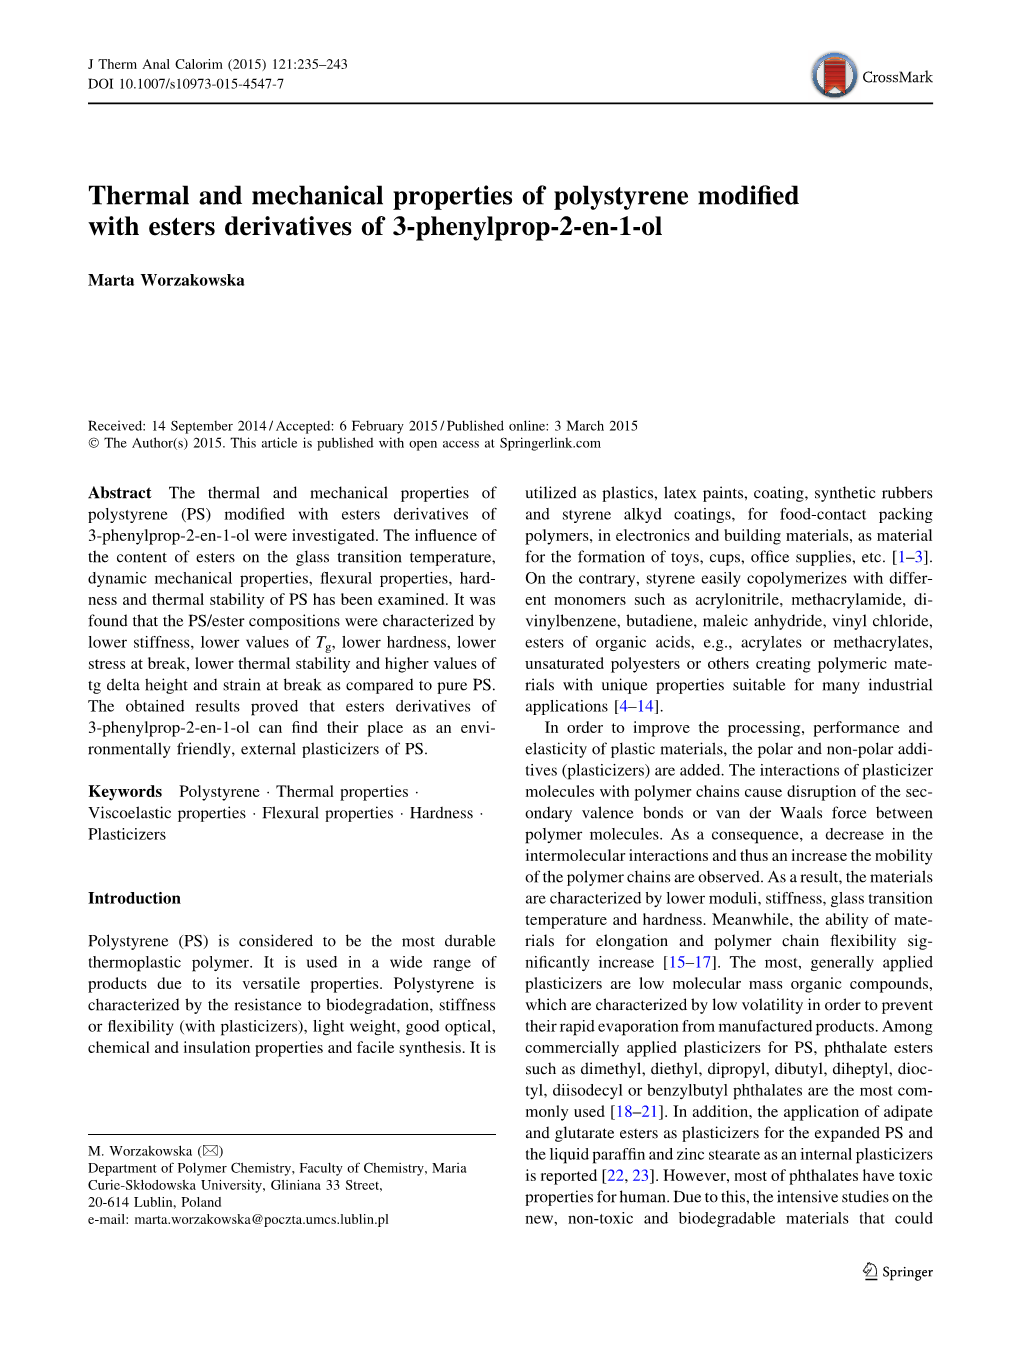 Thermal and Mechanical Properties of Polystyrene Modified with Esters